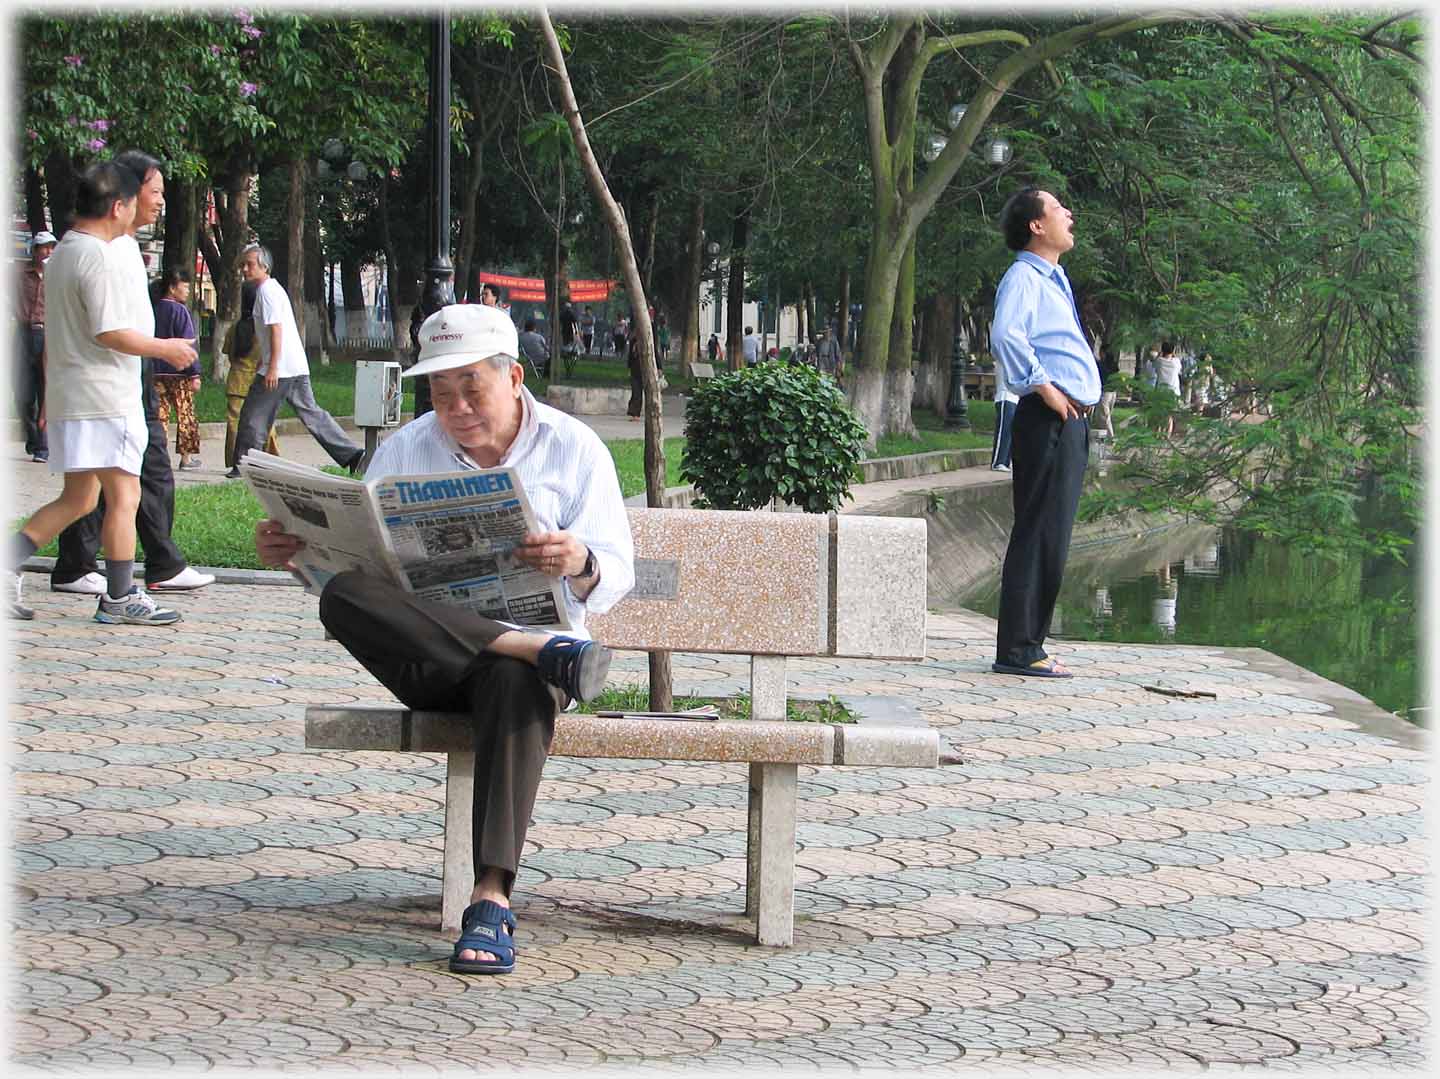 Man sitting on park bench reading newspaper, others behind him.